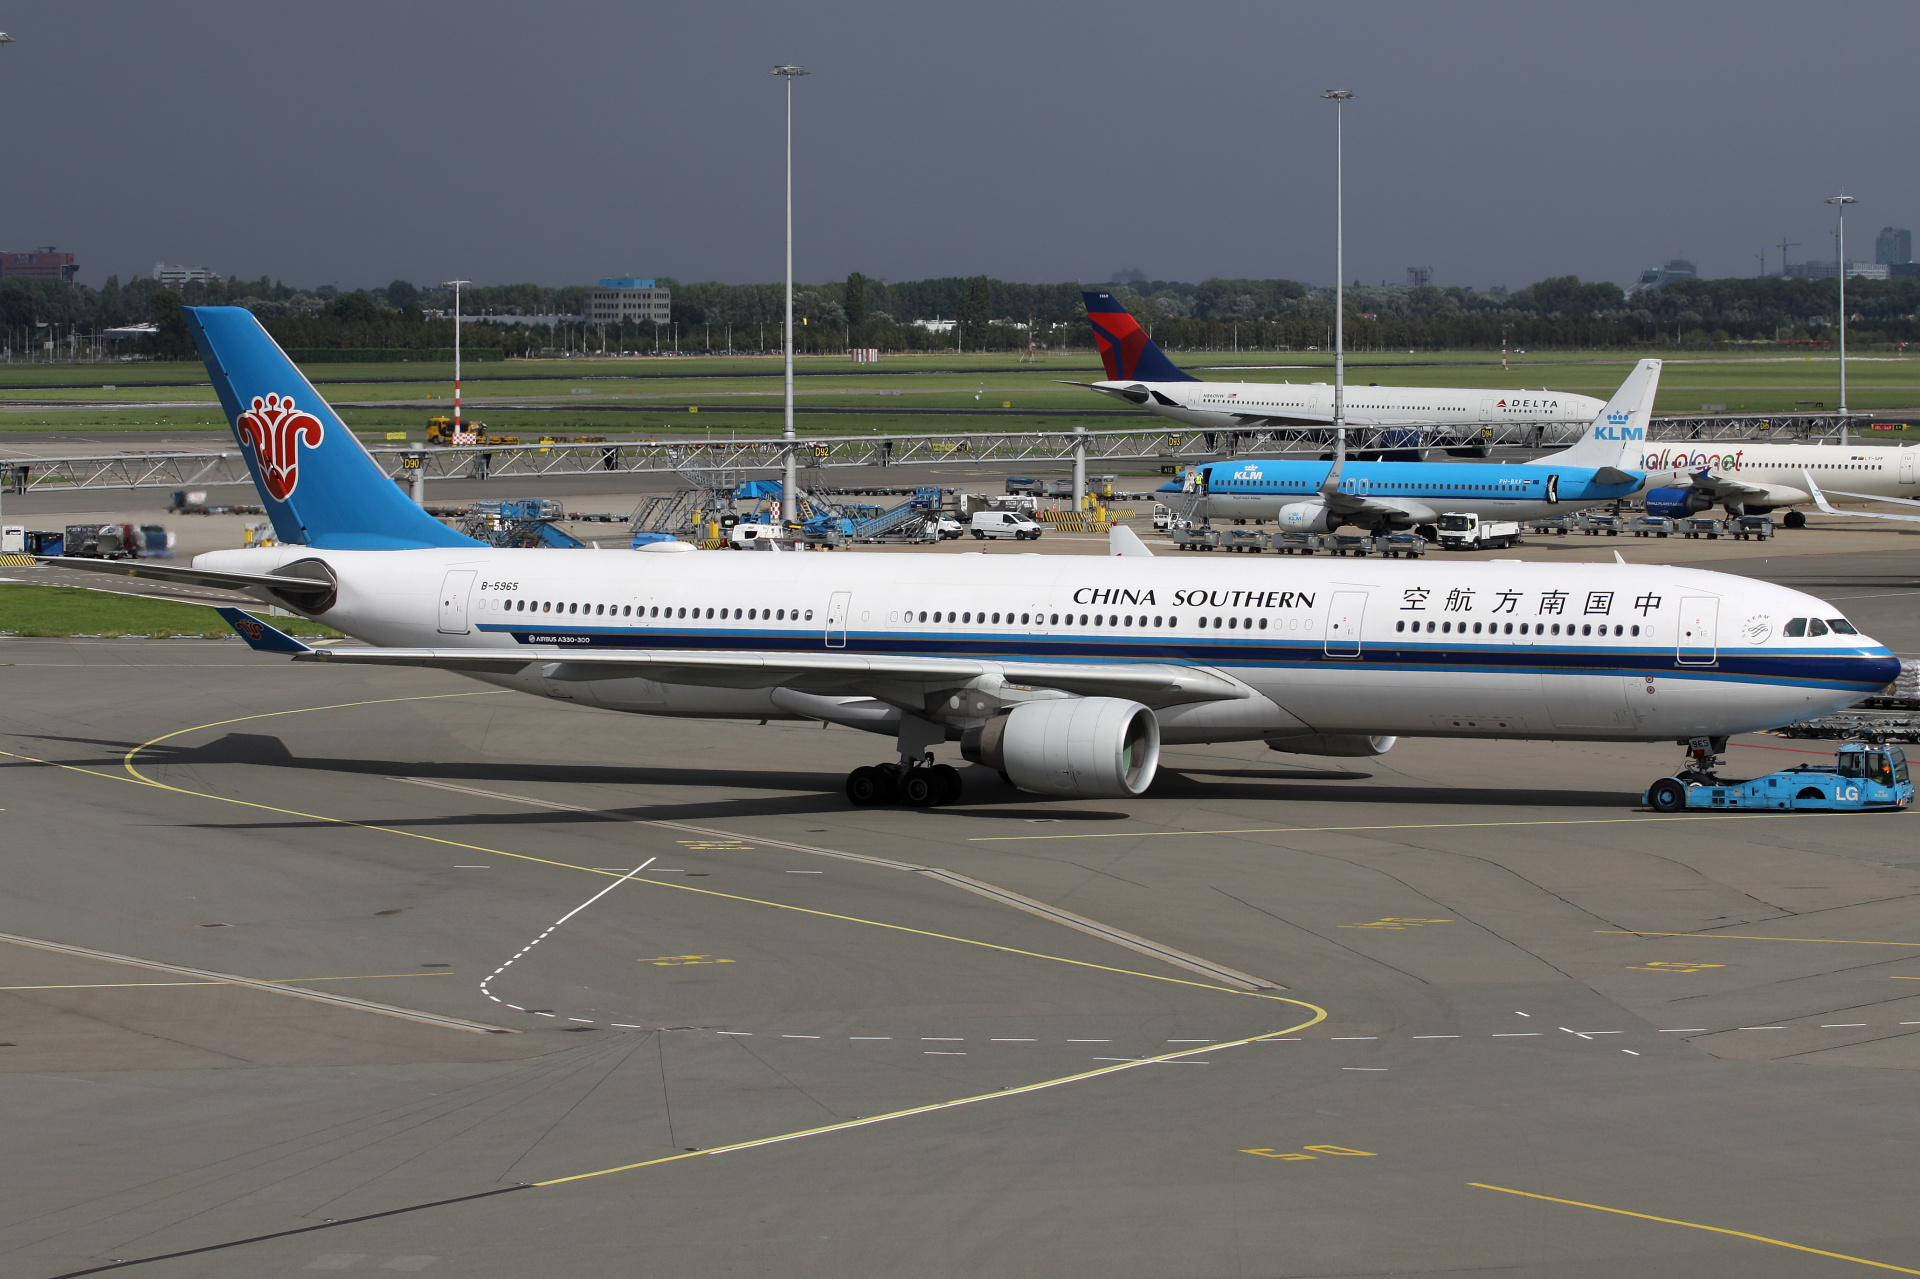 B-5965, China Southern Airlines (Aircraft » Schiphol Spotting » Airbus A330-300)